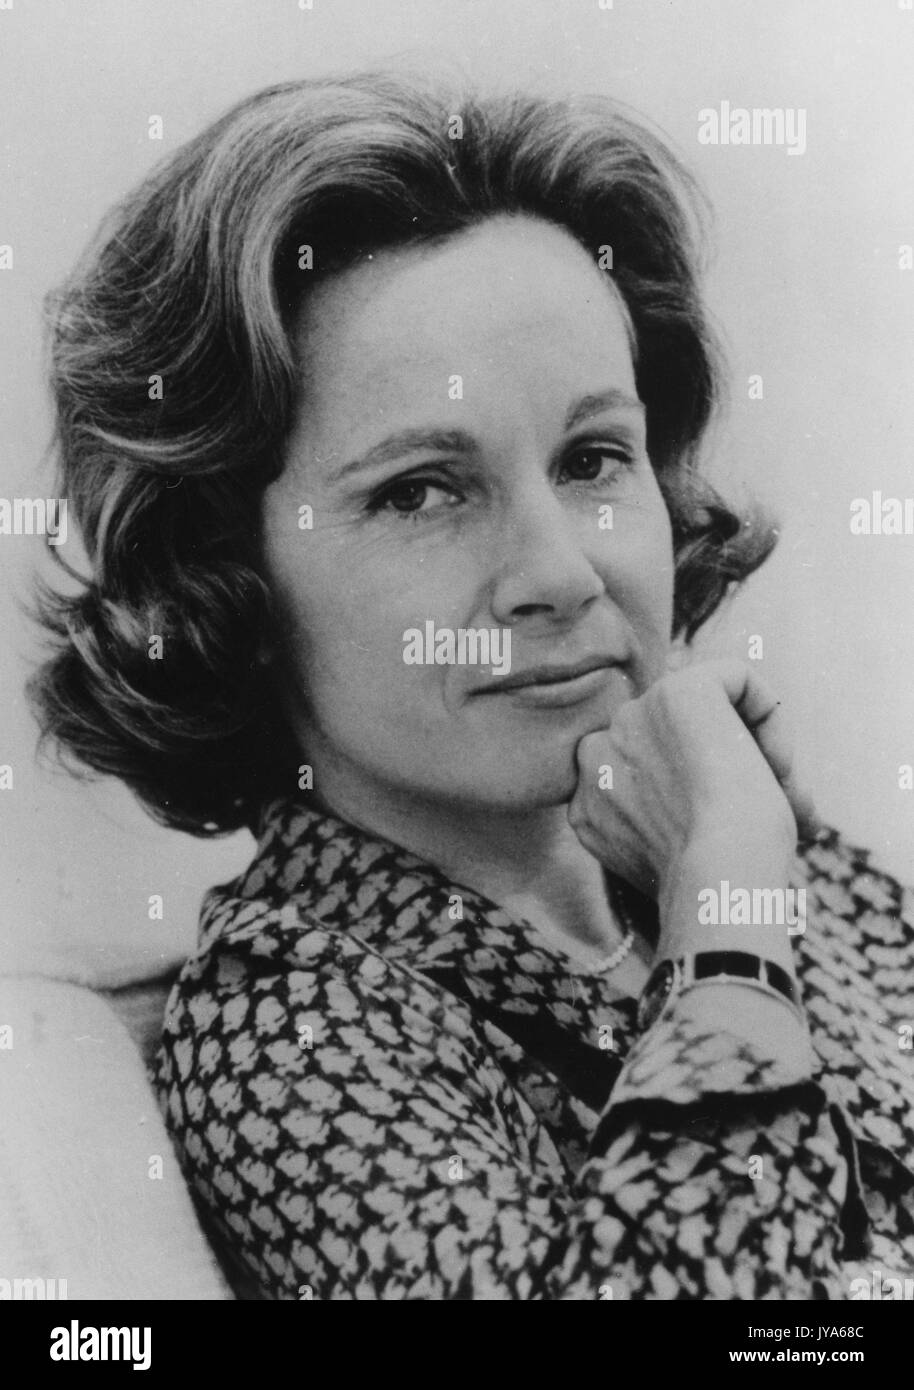 A headshot of American journalist Shana Alexander, maturely meeting eyes with the camera with hand on her chin, who spoke at the lecture series Milton S. Eisenhower Symposium at Johns Hopkins University, Baltimore, Maryland. 1975. Stock Photo